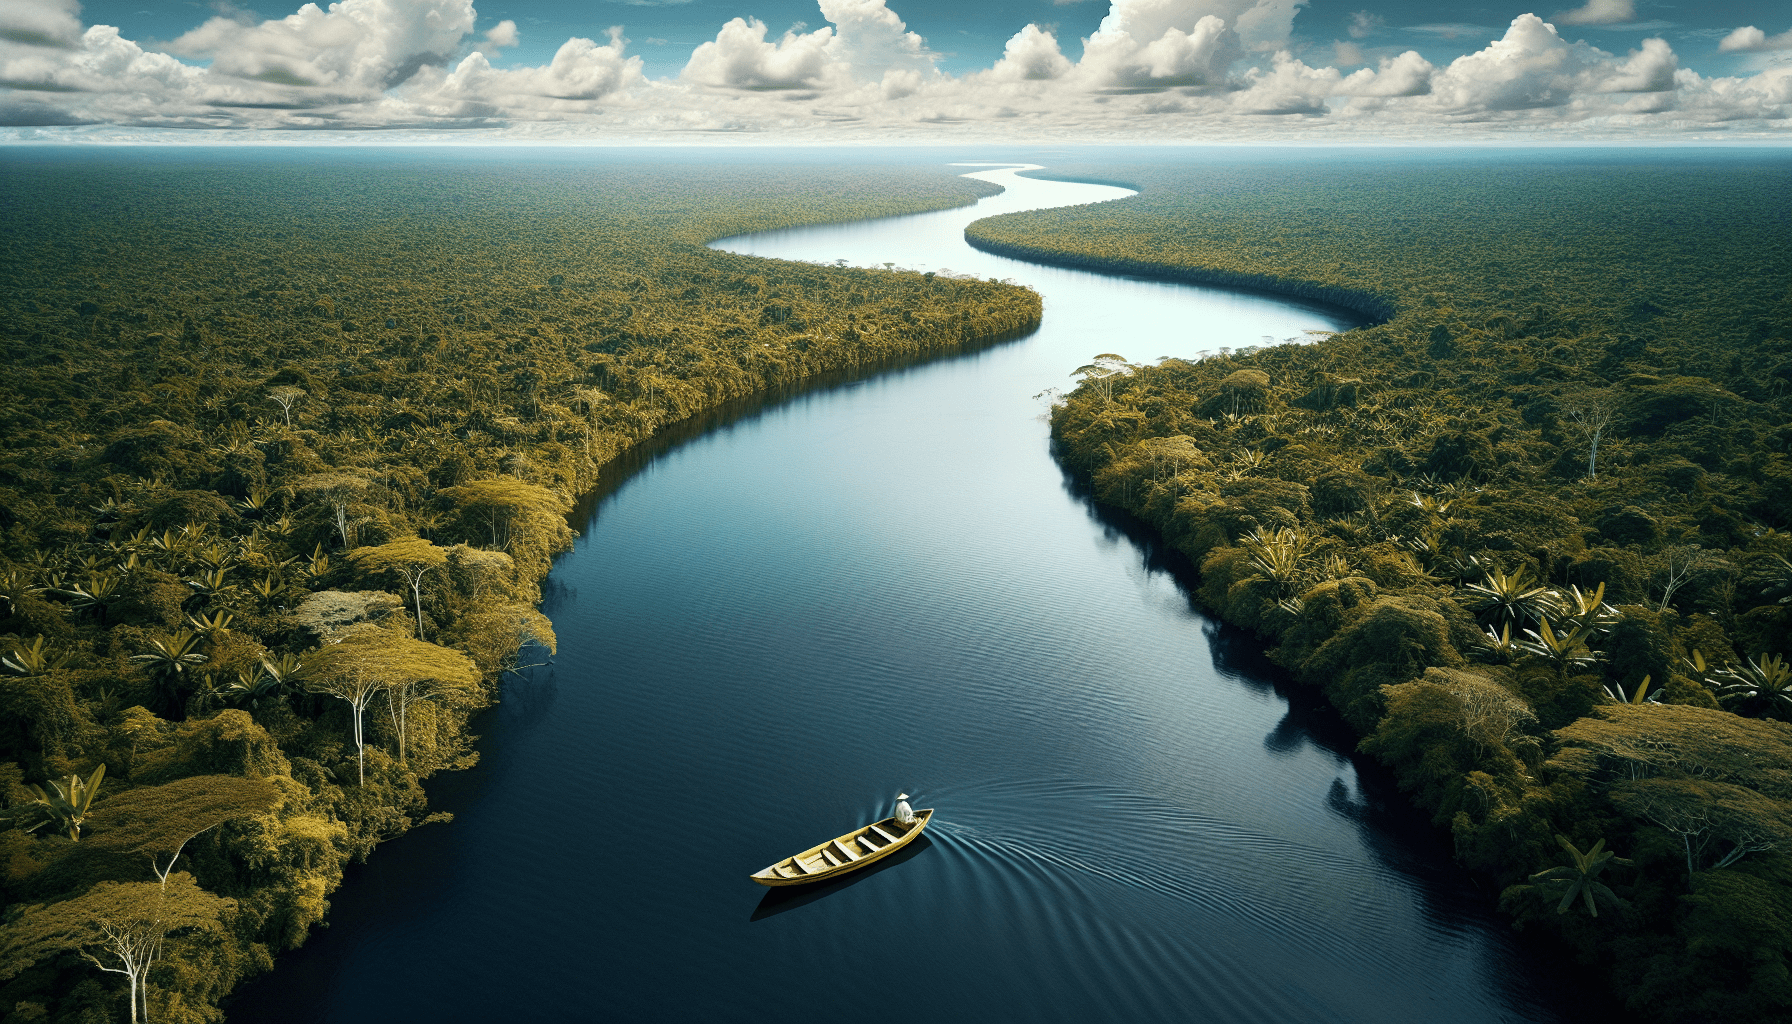 Why There Is No Bridge On Amazon River?